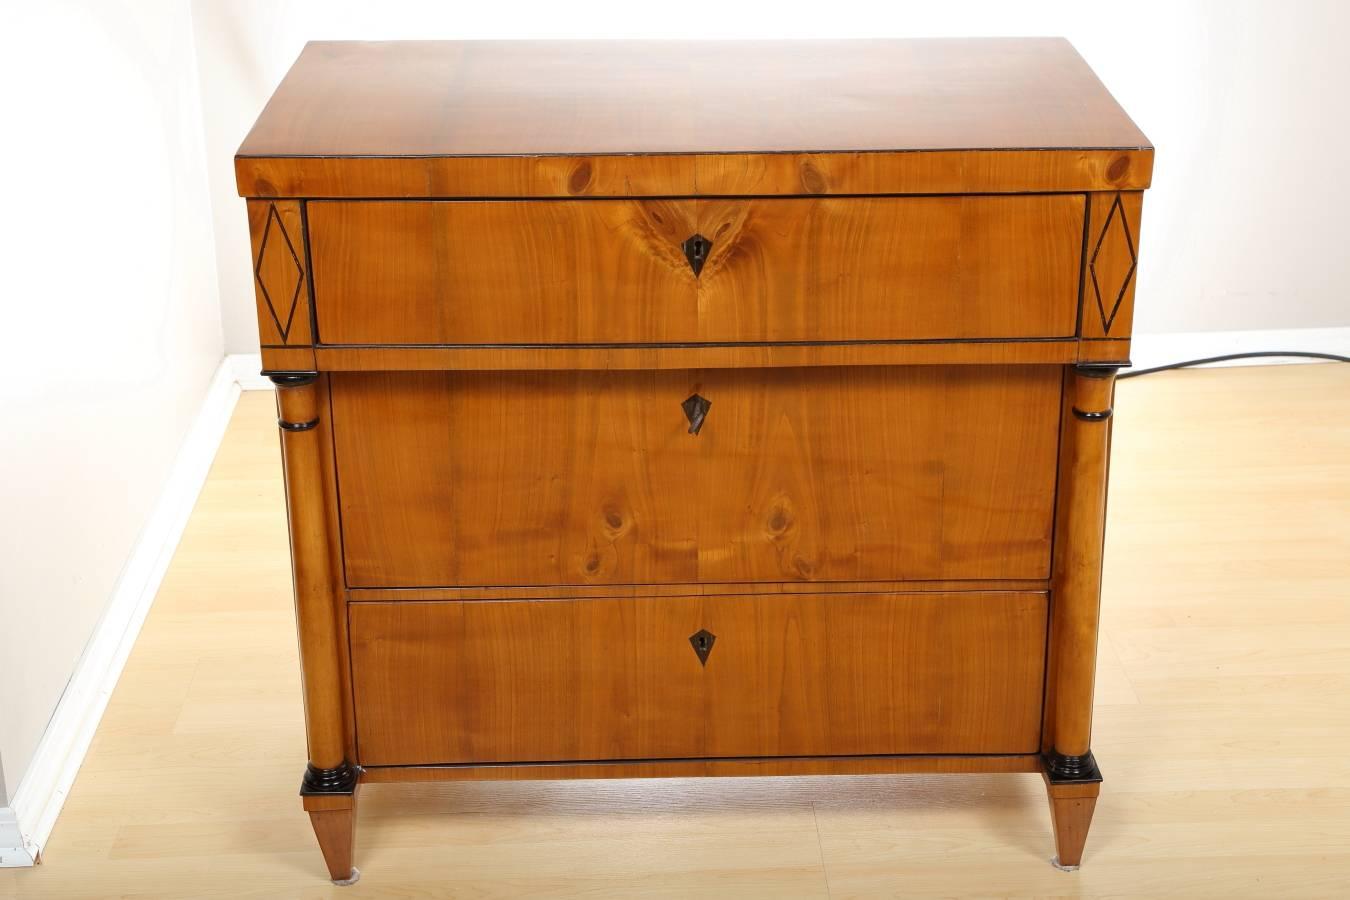 Biedermeier cherry commode, circa 1840. This elegant cherry chest of drawers features three large drawers flanked by round columns resting on tapered feet. Ebonized wood diamond shape inlays and column details add to the beauty of the piece. The